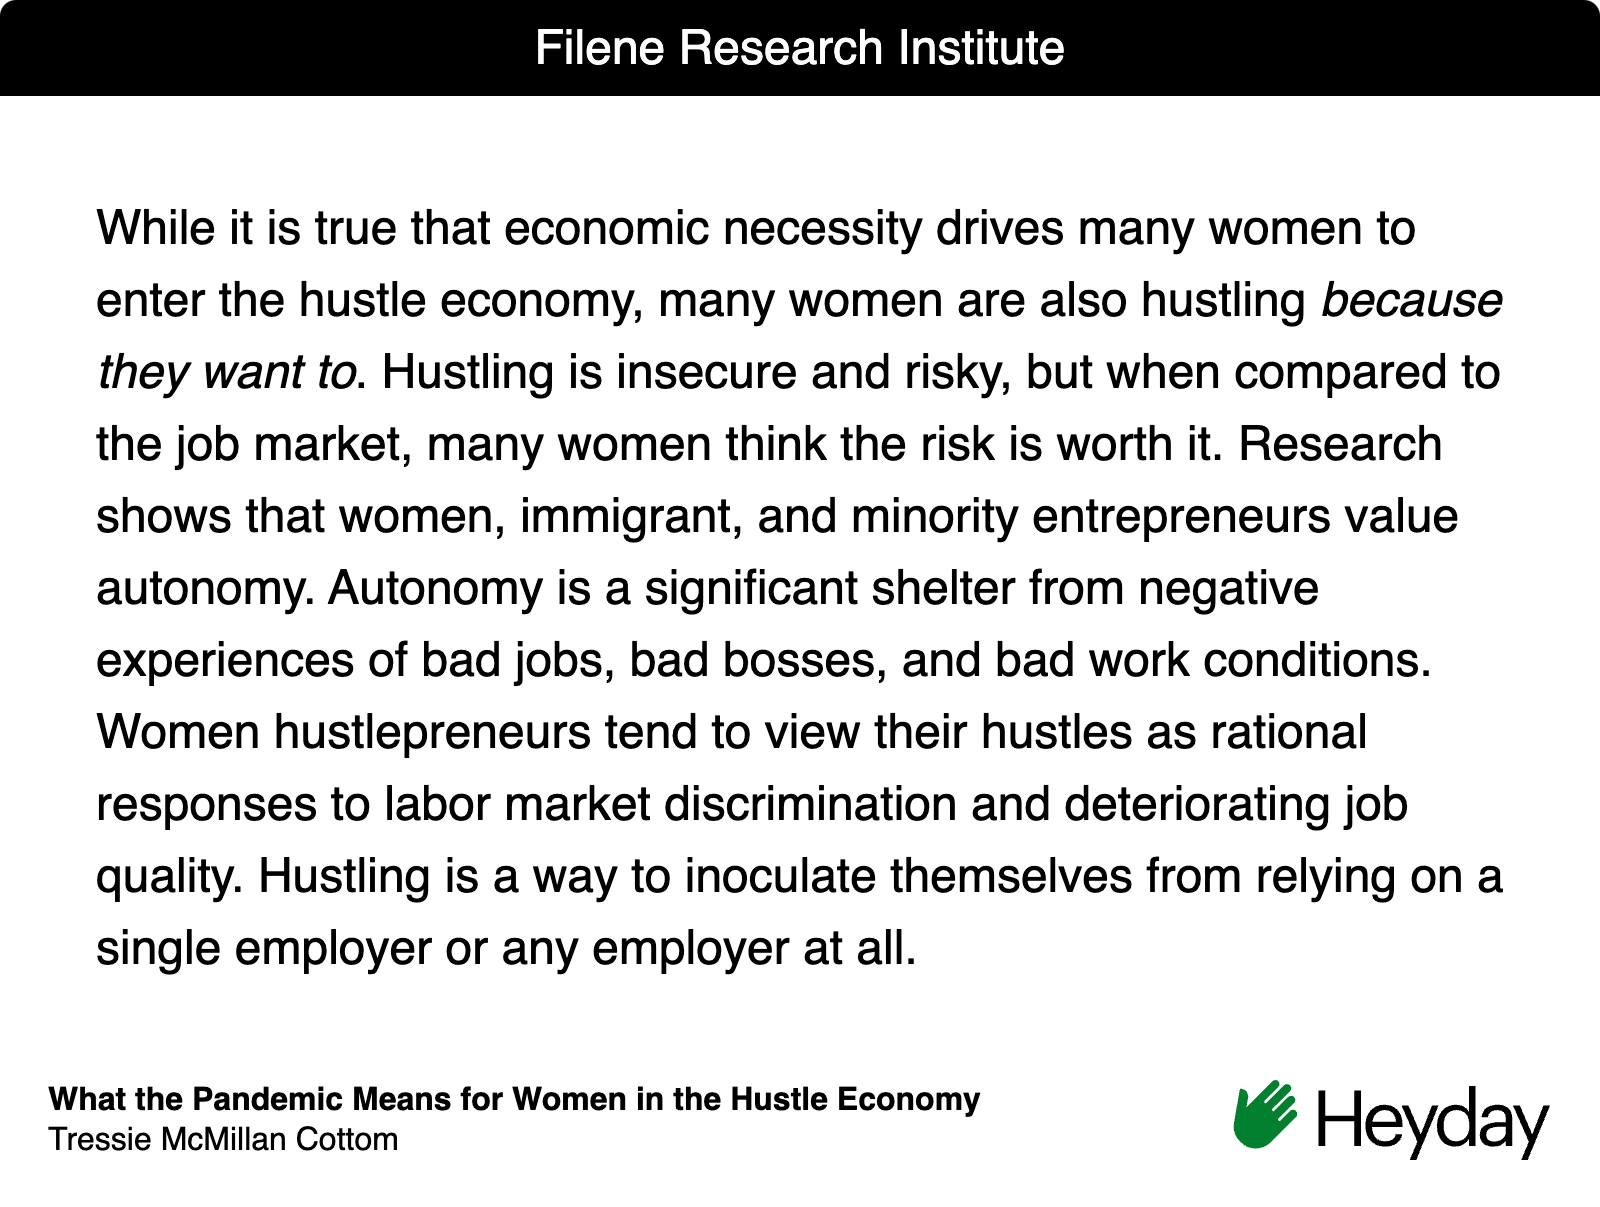 Quote from article by Tressie McMillan Cottom "While it is true that economic necessity drives many women to enter the hustle economy, many women are also hustling because they want to. Hustling is insecure and risky, but when compared to the job market, many women think the risk is worth it. Research shows that women, immigrant, and minority entrepreneurs value autonomy. Autonomy is a significant shelter from negative experiences of bad jobs, bad bosses, and bad work conditions. Women hustlepreneurs tend to view their hustles as rational responses to labor market discrimination and deteriorating job quality. Hustling is a way to inoculate themselves from relying on a single employer or any employer at all."